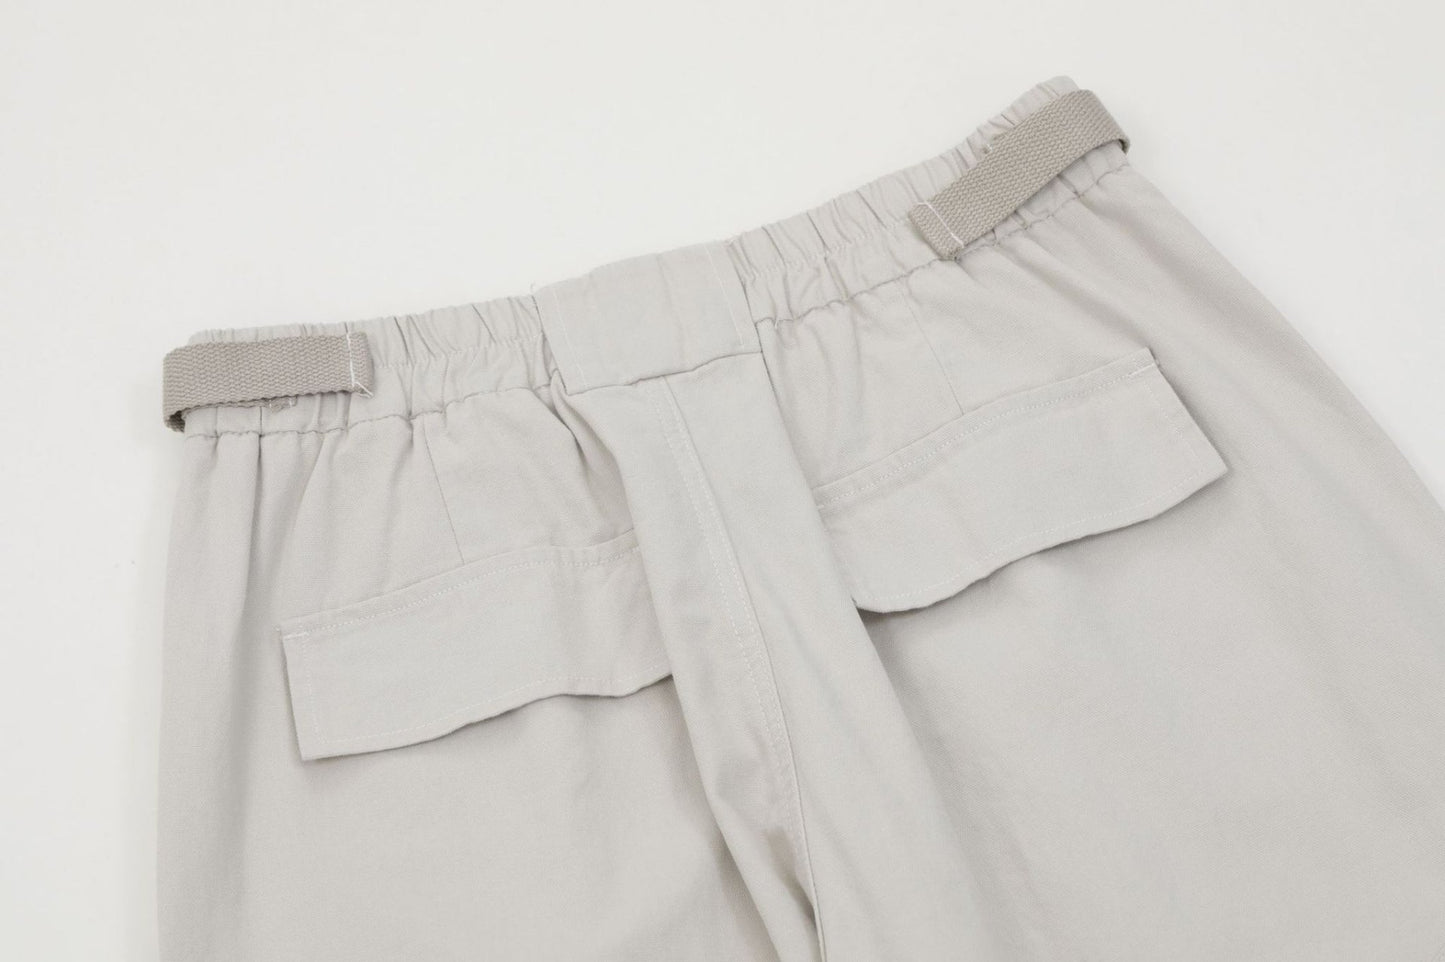 Unisex 2 Colors Gray and Beige Adjustable Large Pocket Trousers